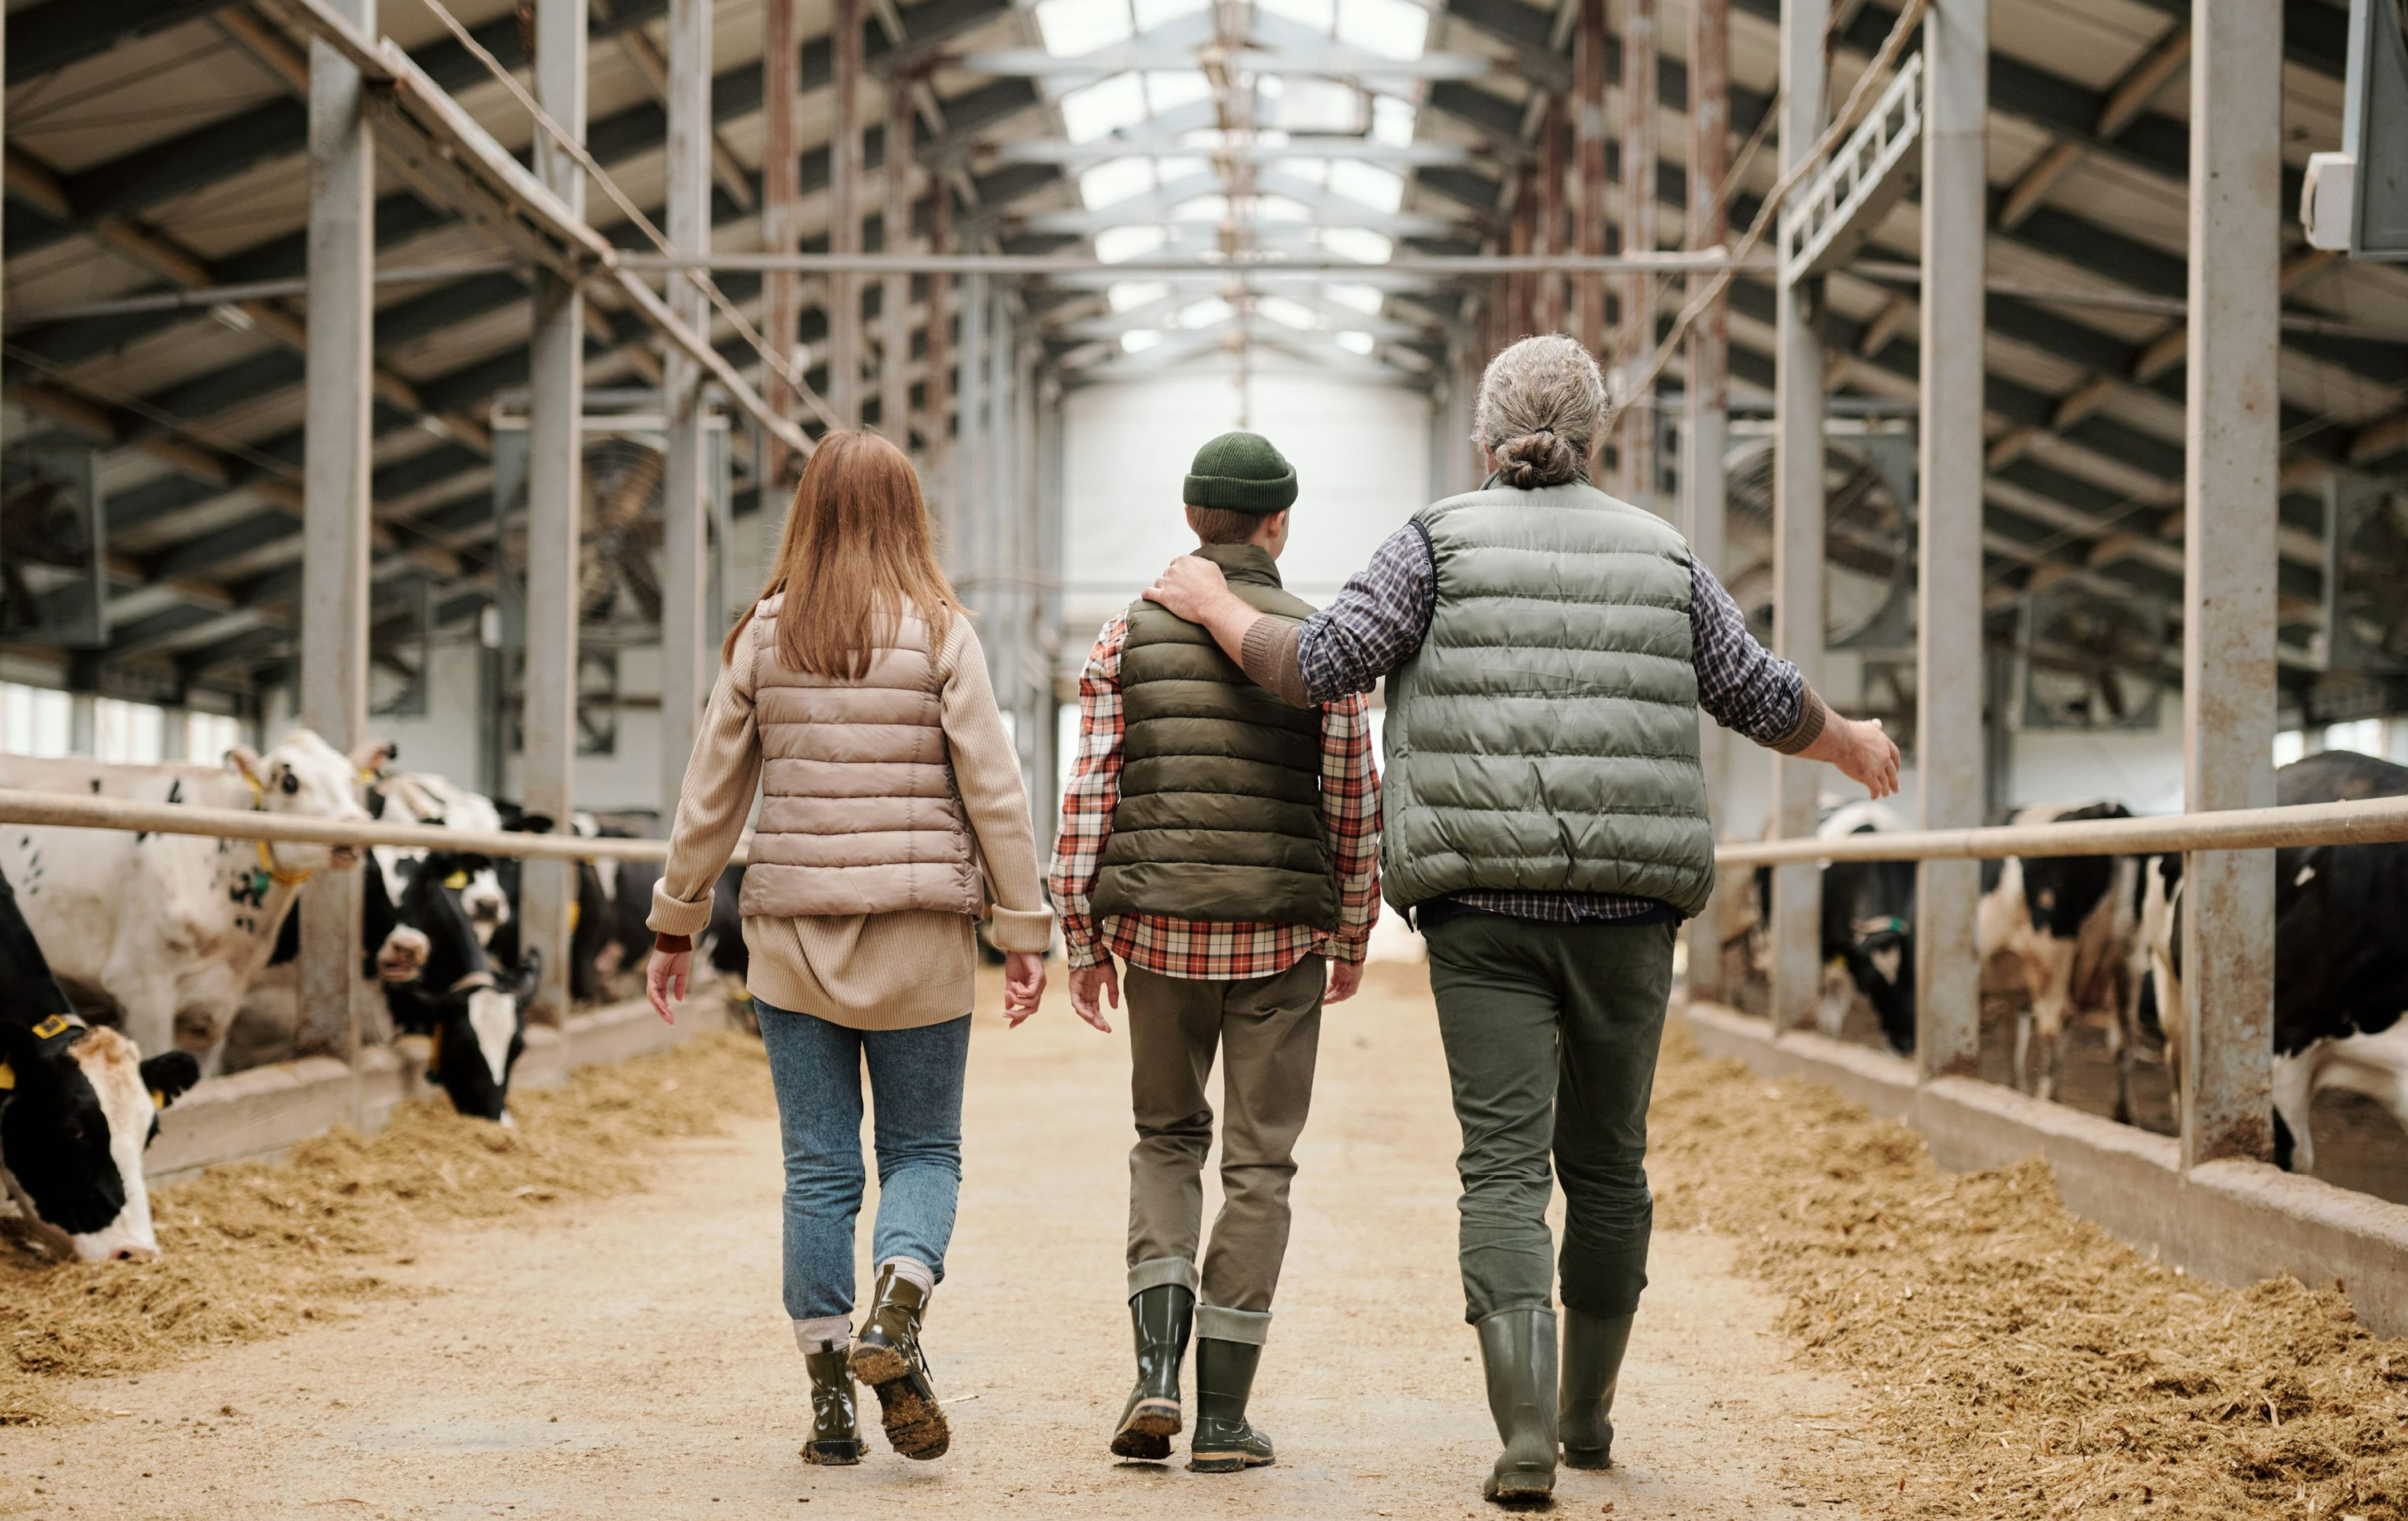 Father walking with children through cattle barn